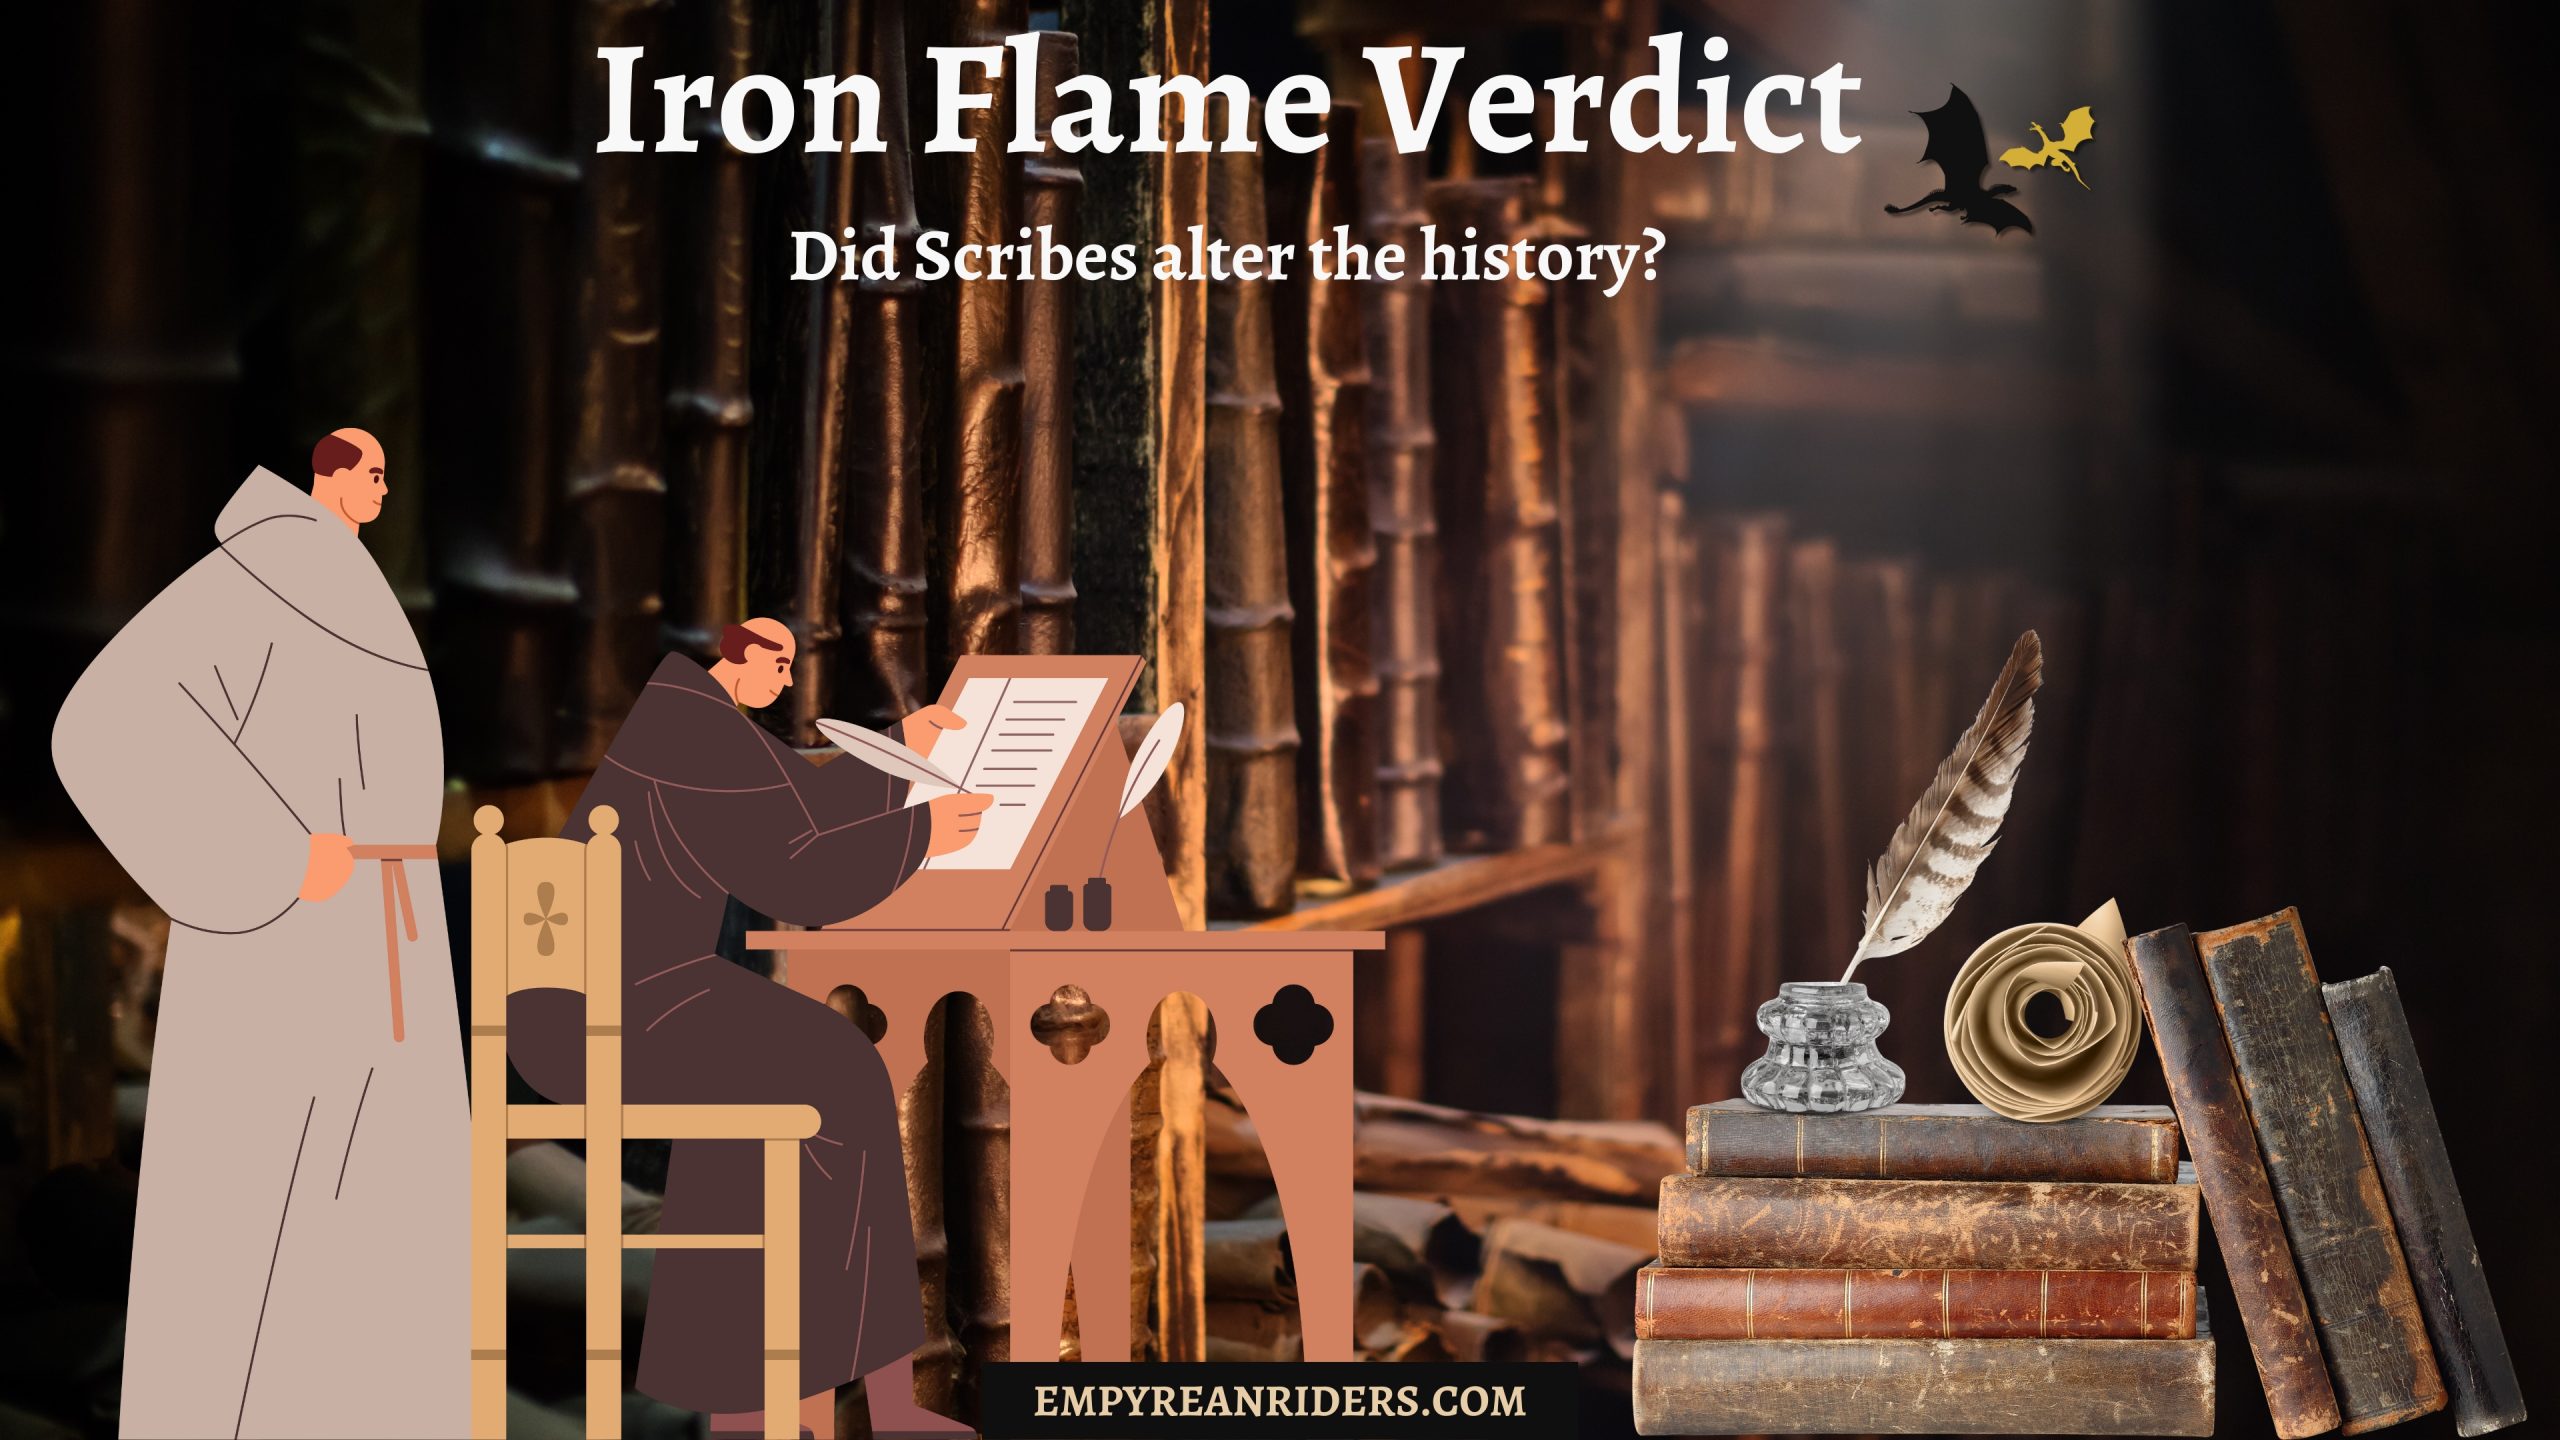 Fourth Wing theory verdict thanks to Iron Flame - Did Scribes alter the history